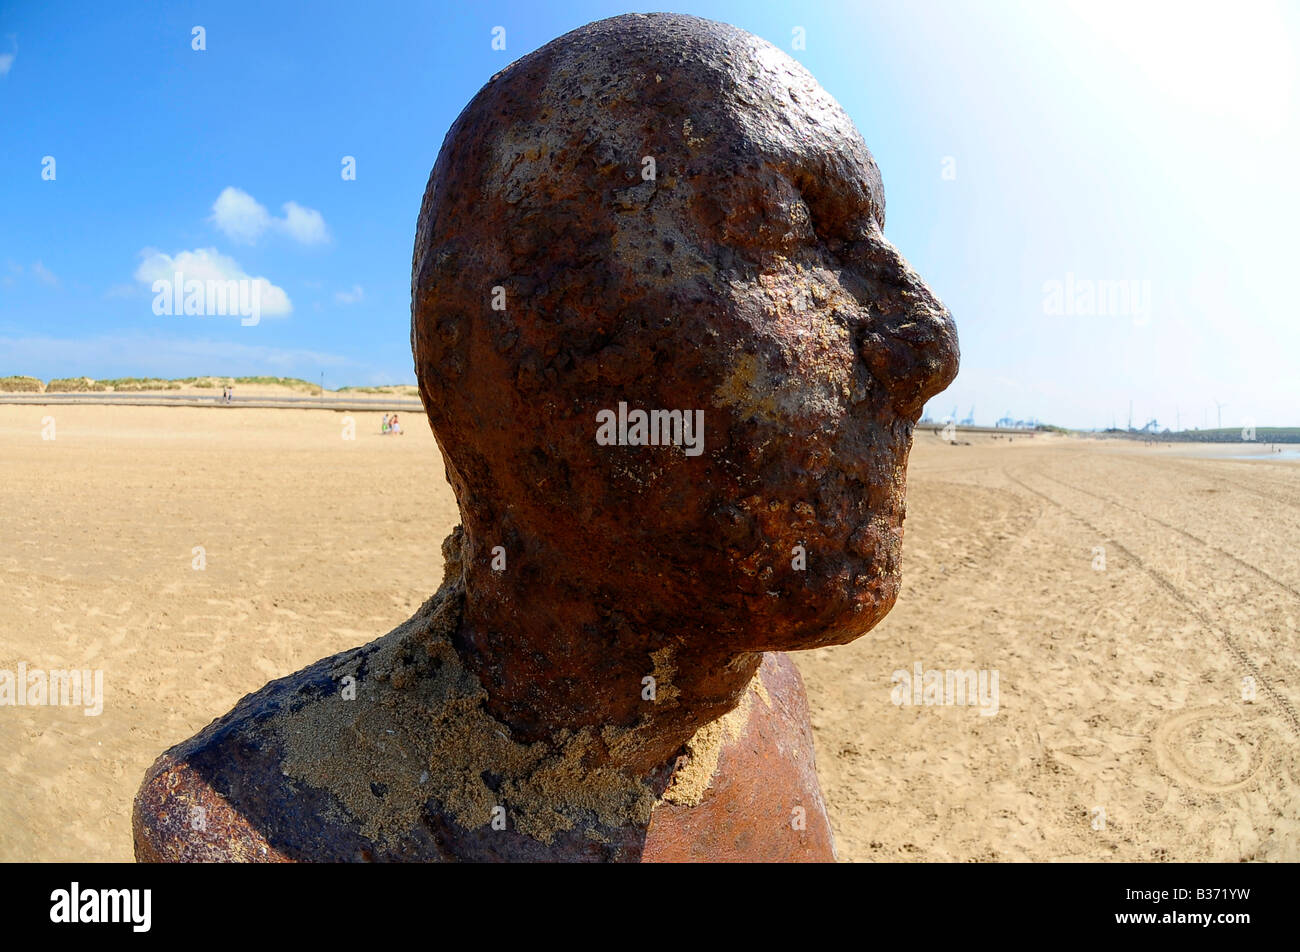 profile face head another place iron man anthony gormley crosby beach liverpool travel tourism art sculpture summer seaside Stock Photo